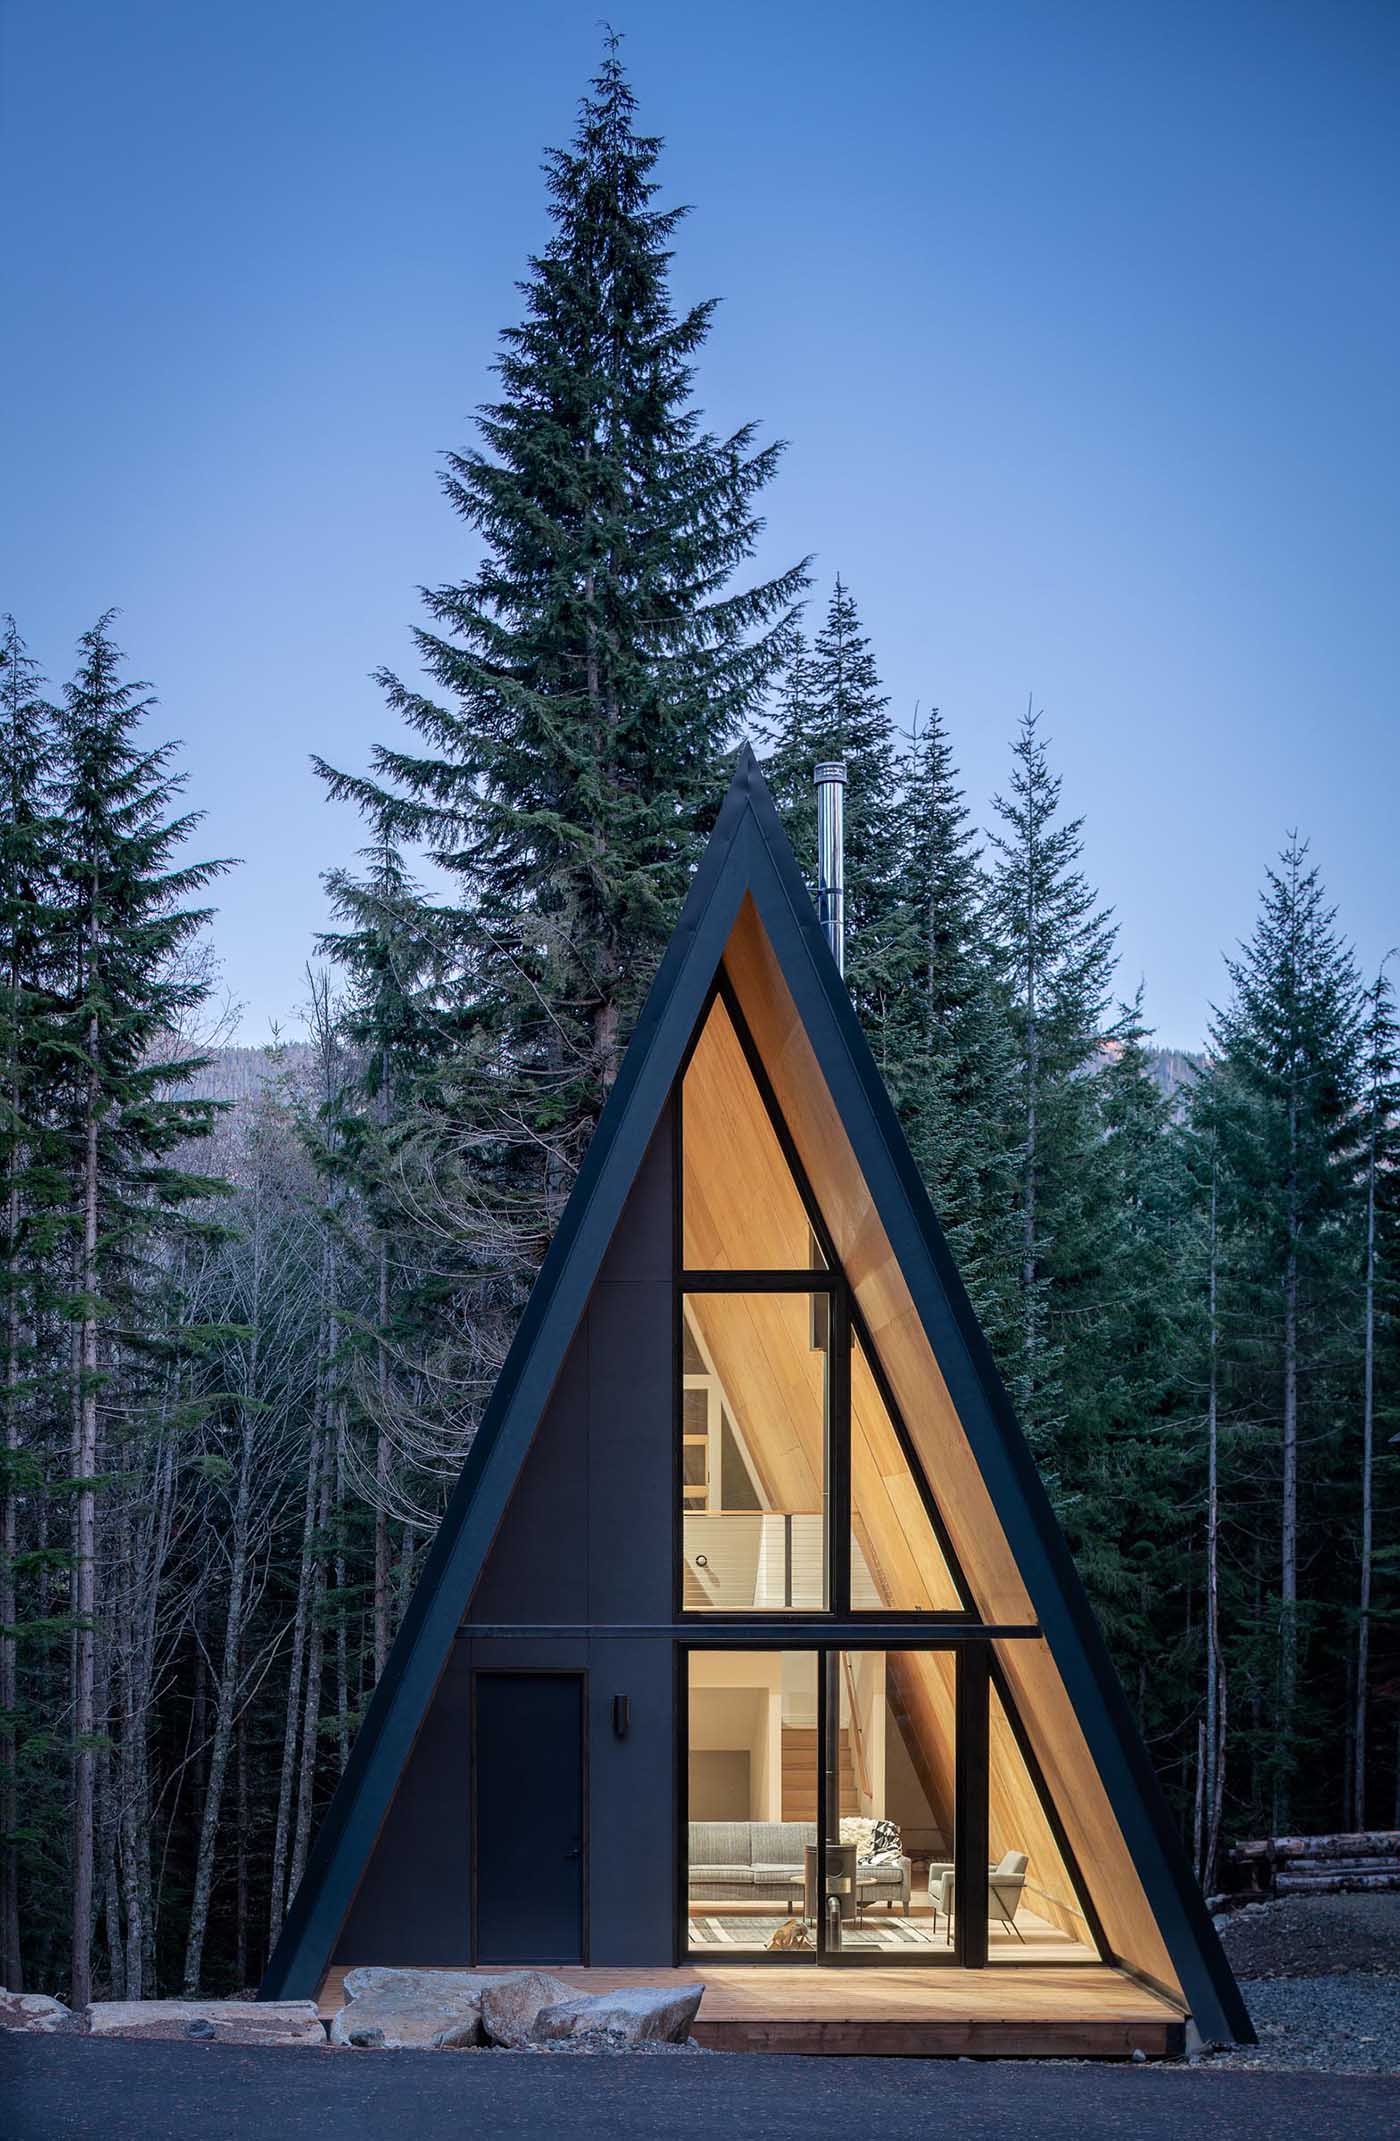 This 1,721-square-foot A-frame cabin has been built out of prefabricated mass plywood panels with a standing-seam metal roof with a black finish. 